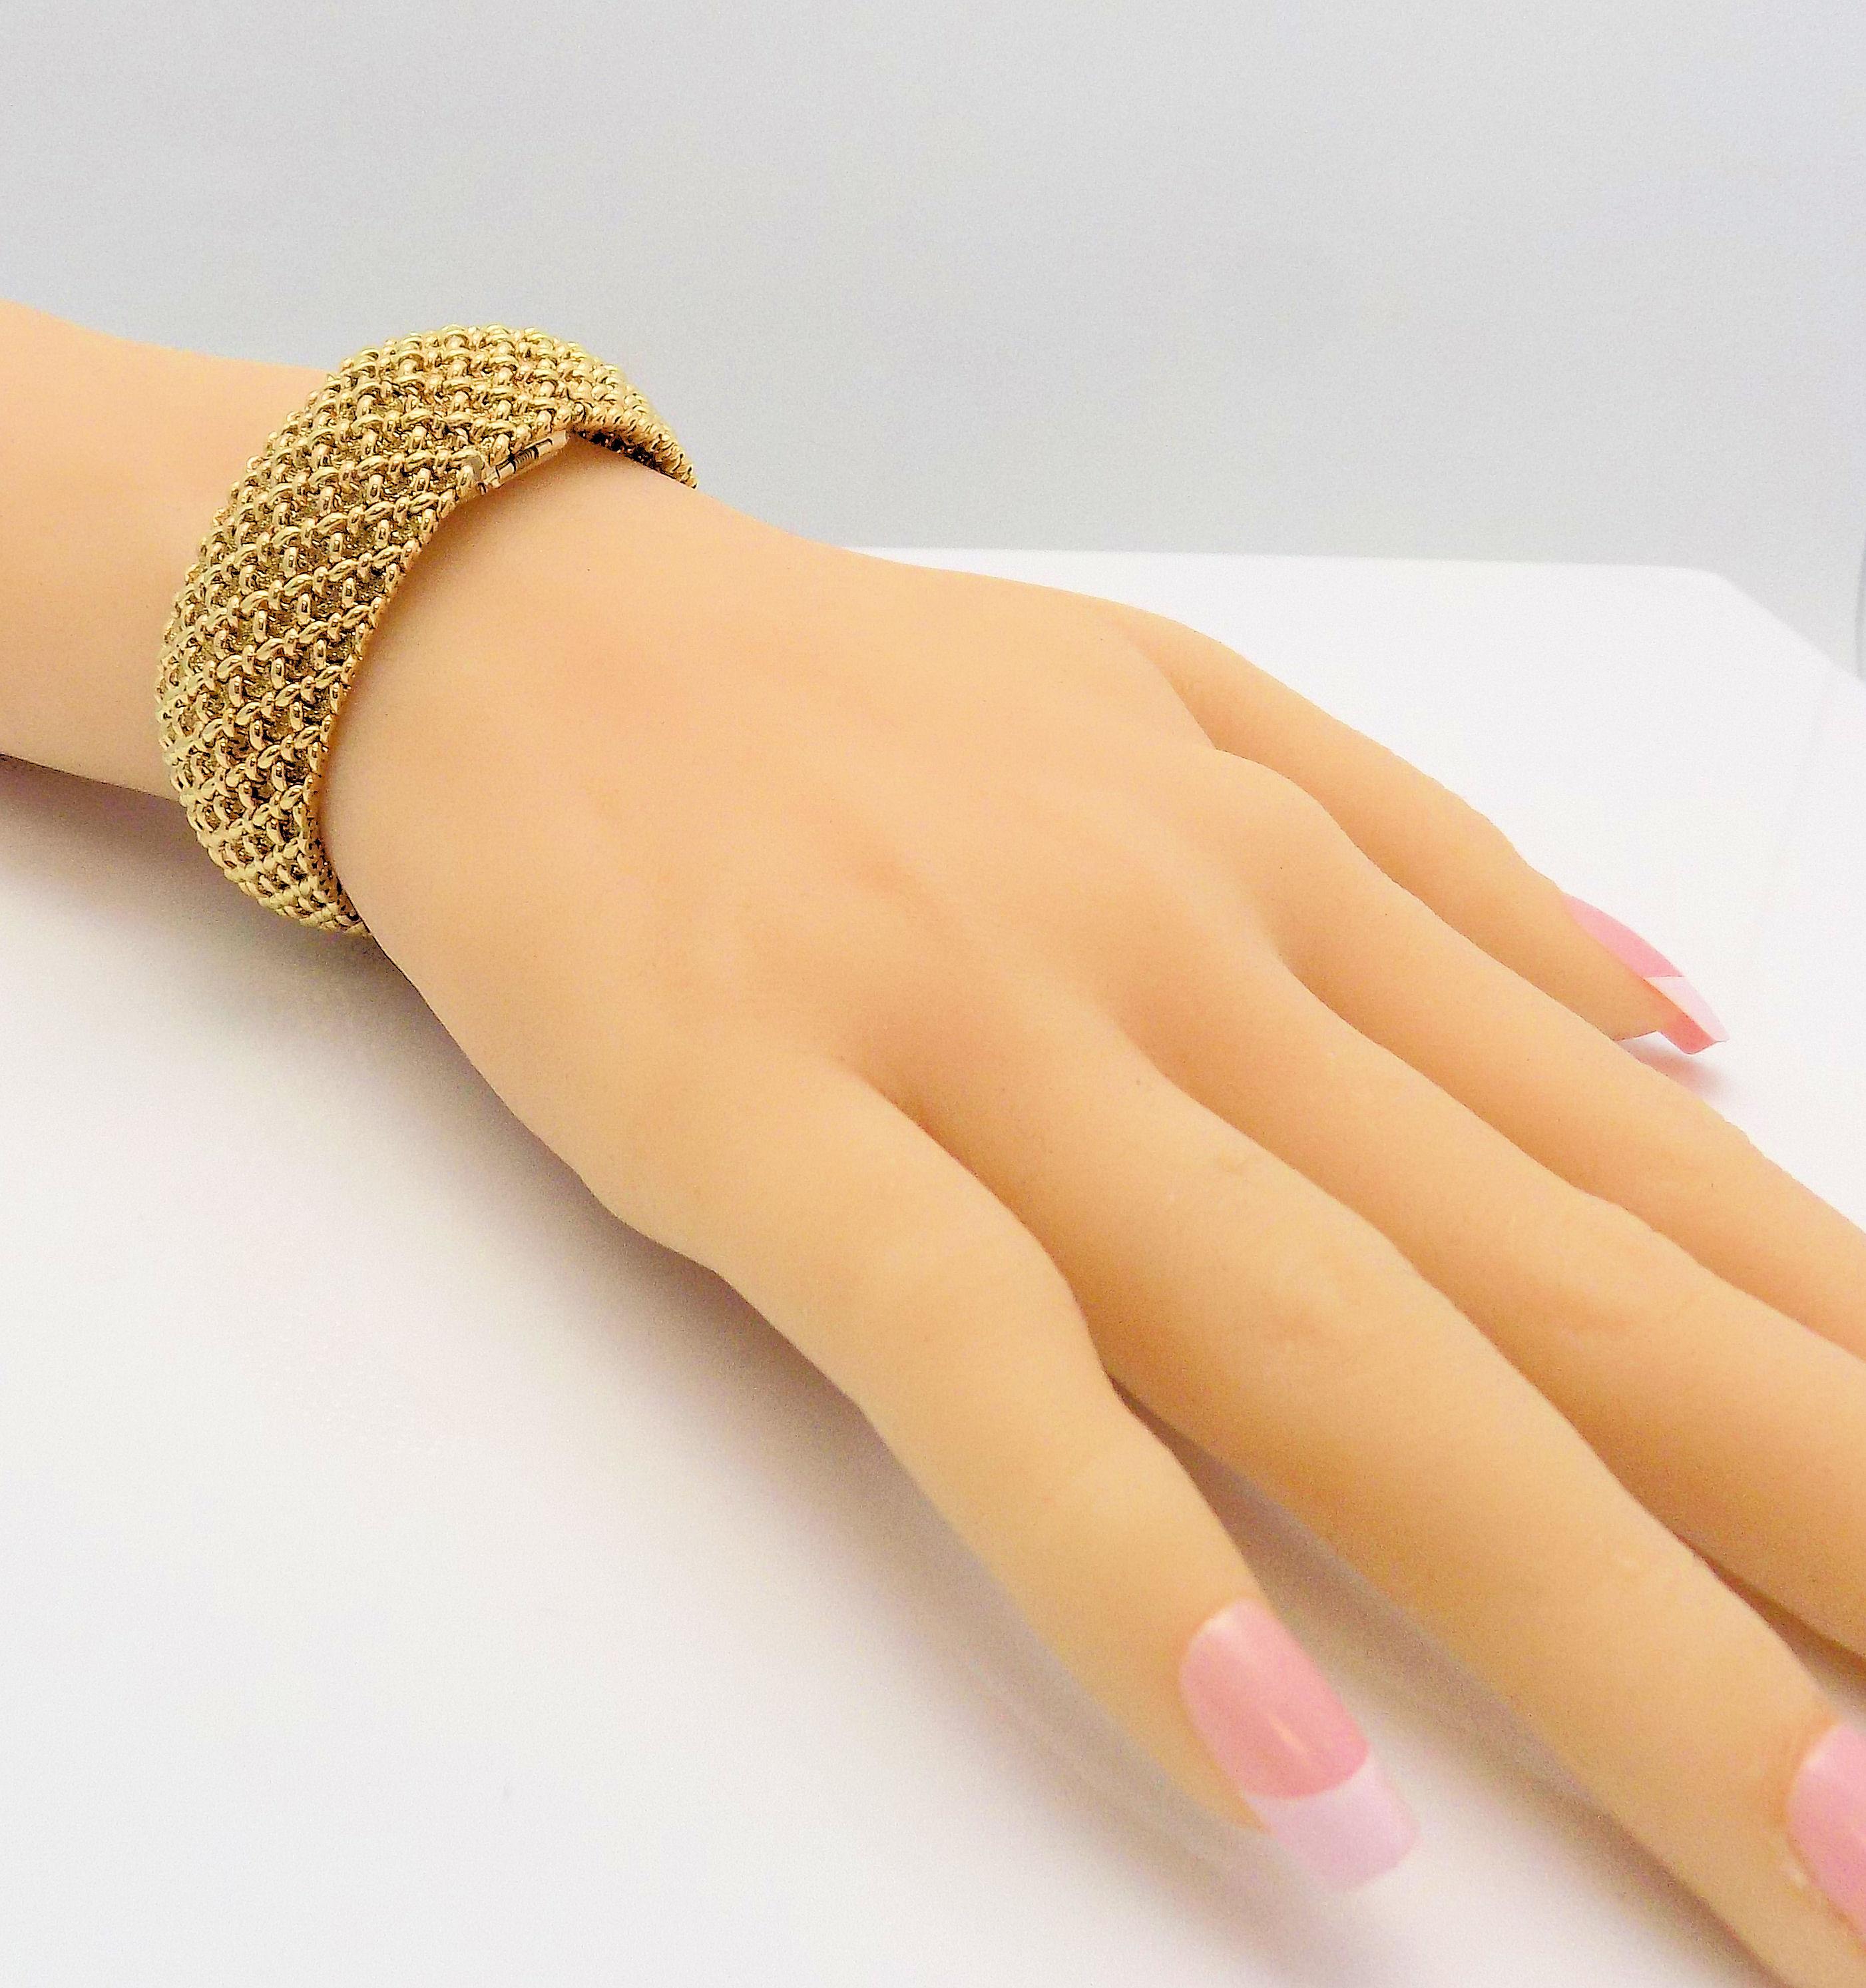 Glamorous is this 14 Karat Yellow Gold Hamilton Lady's Wristwatch with a Hidden Face and Woven Band that is 7/8